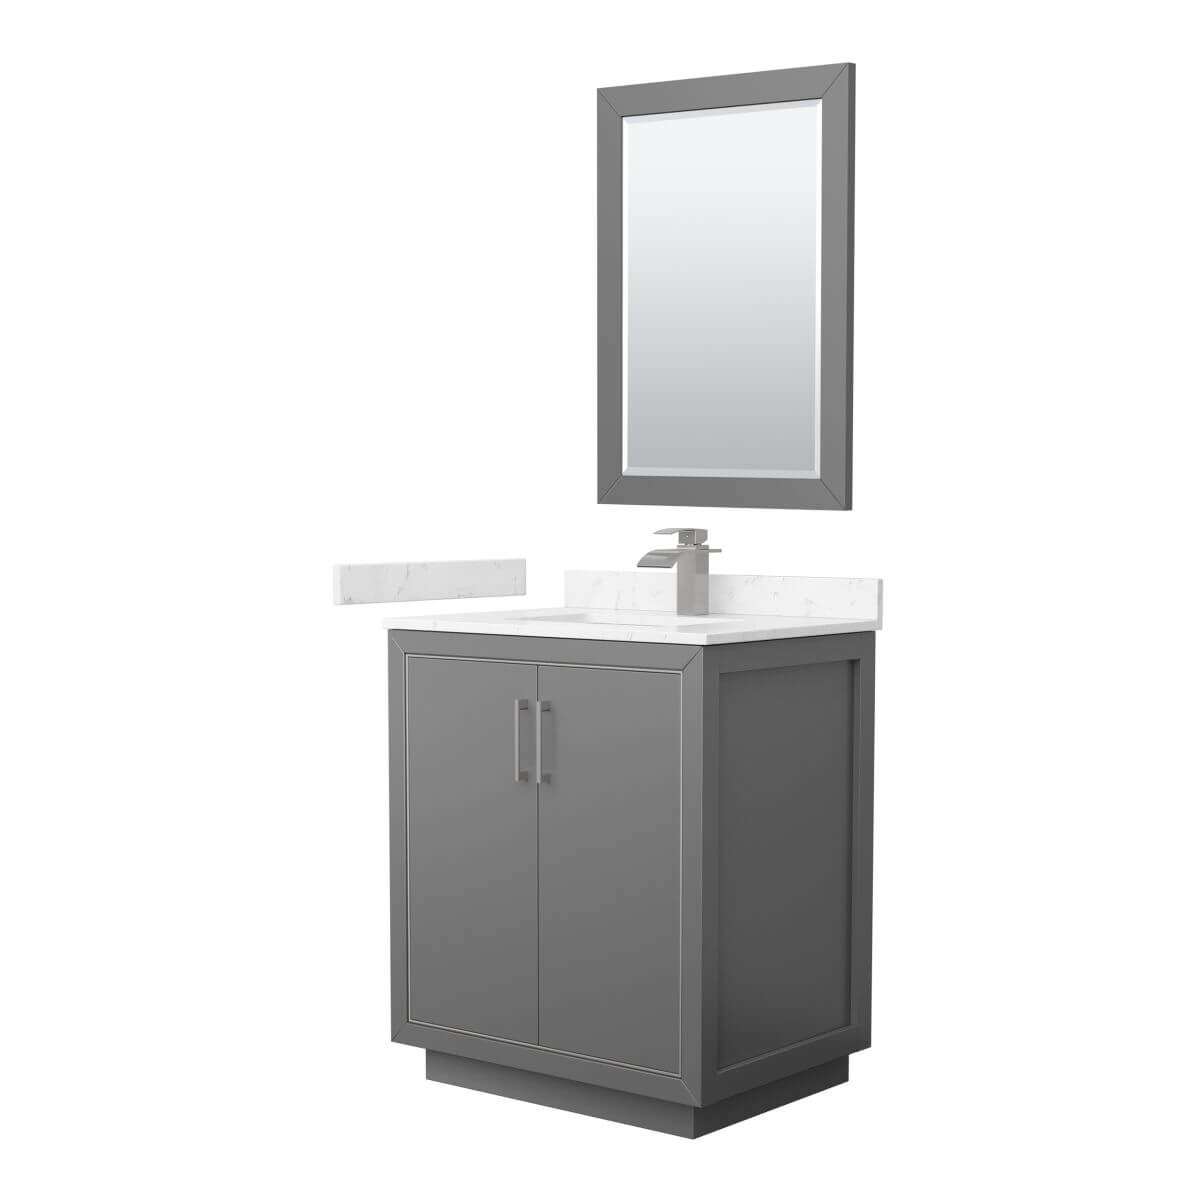 Wyndham Collection WCF111130SKGC2UNSM24 Icon 30 inch Single Bathroom Vanity in Dark Gray with Carrara Cultured Marble Countertop, Undermount Square Sink, Brushed Nickel Trim and 24 Inch Mirror